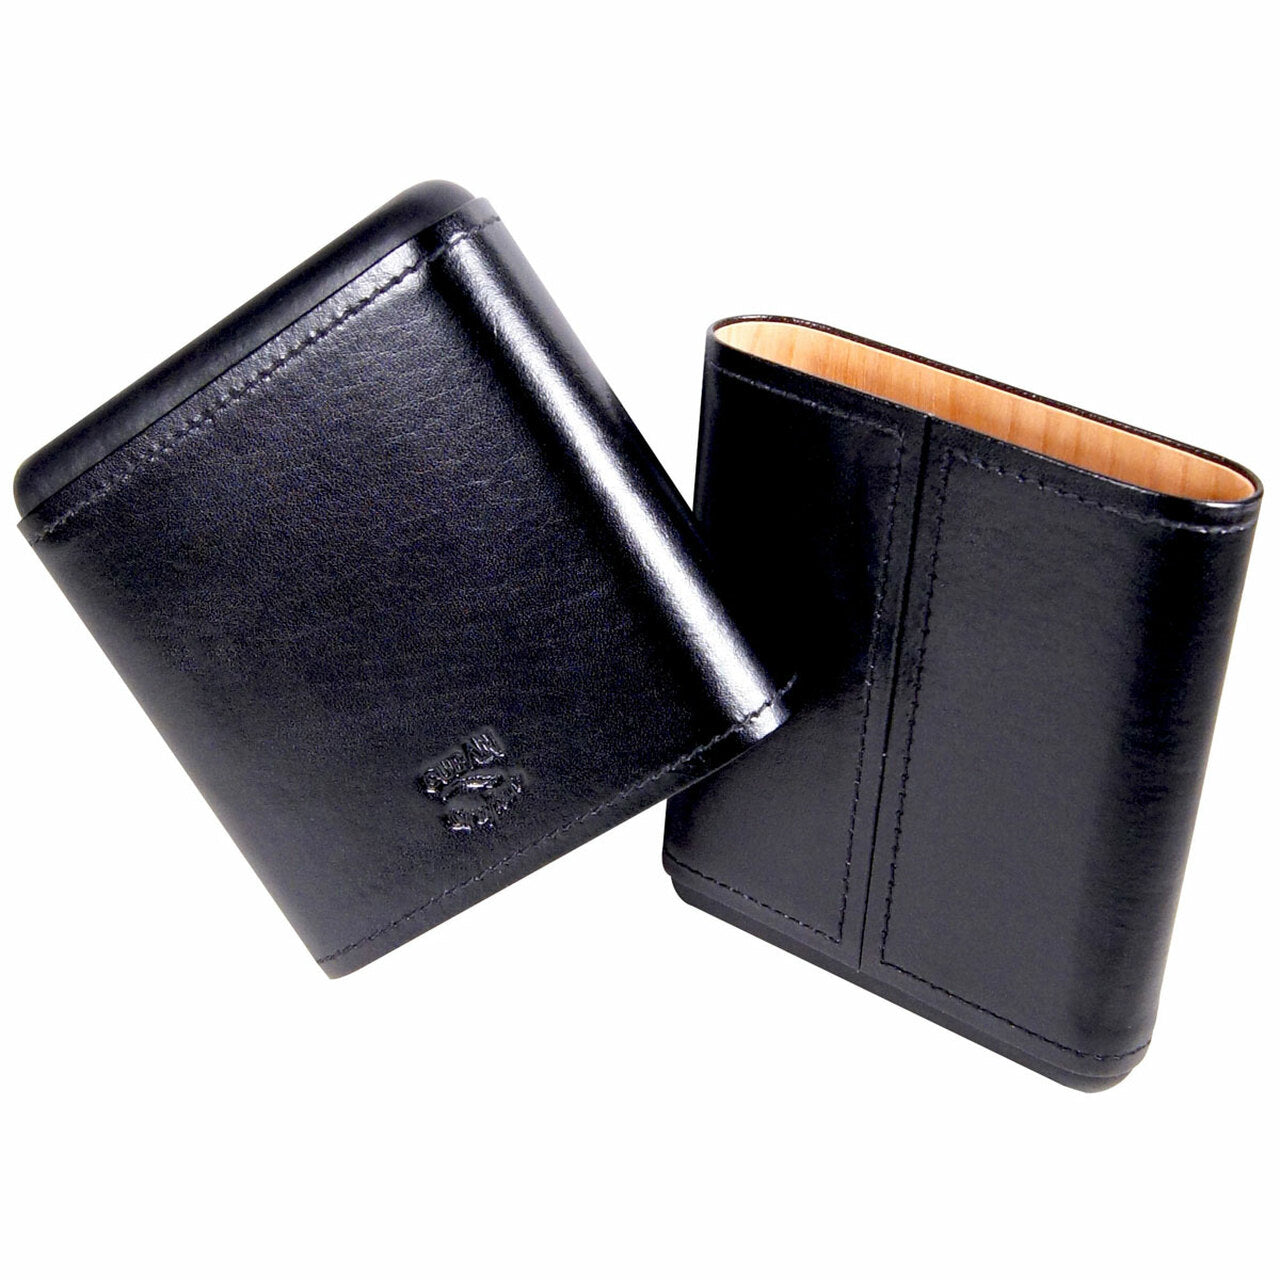 Capriano Black Leather Hard Top Cigar Case for 5 Cigars